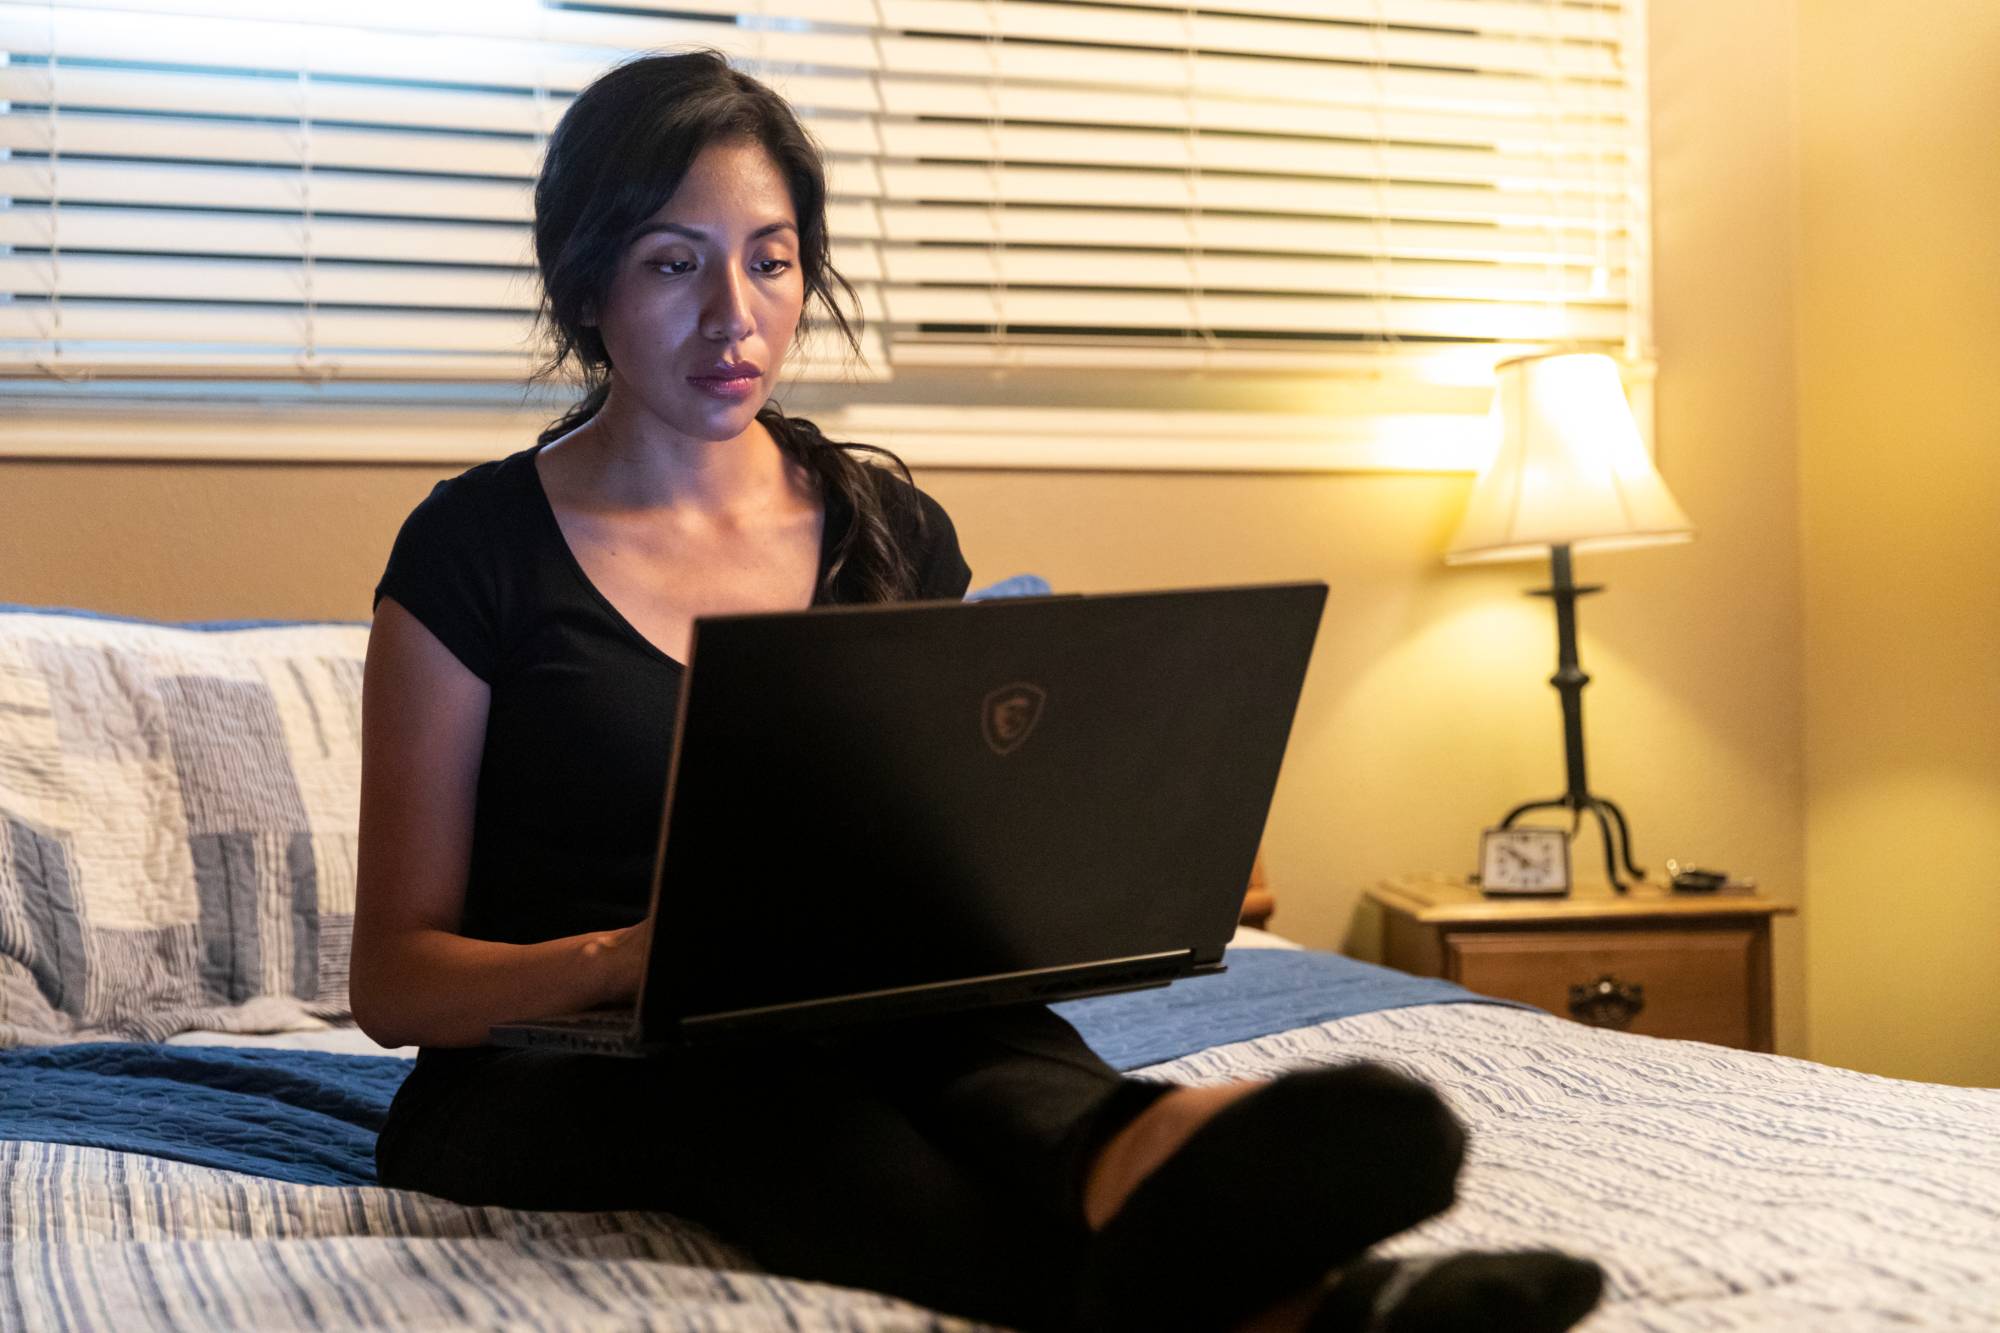 image of a person typing on a laptop in their bedroom